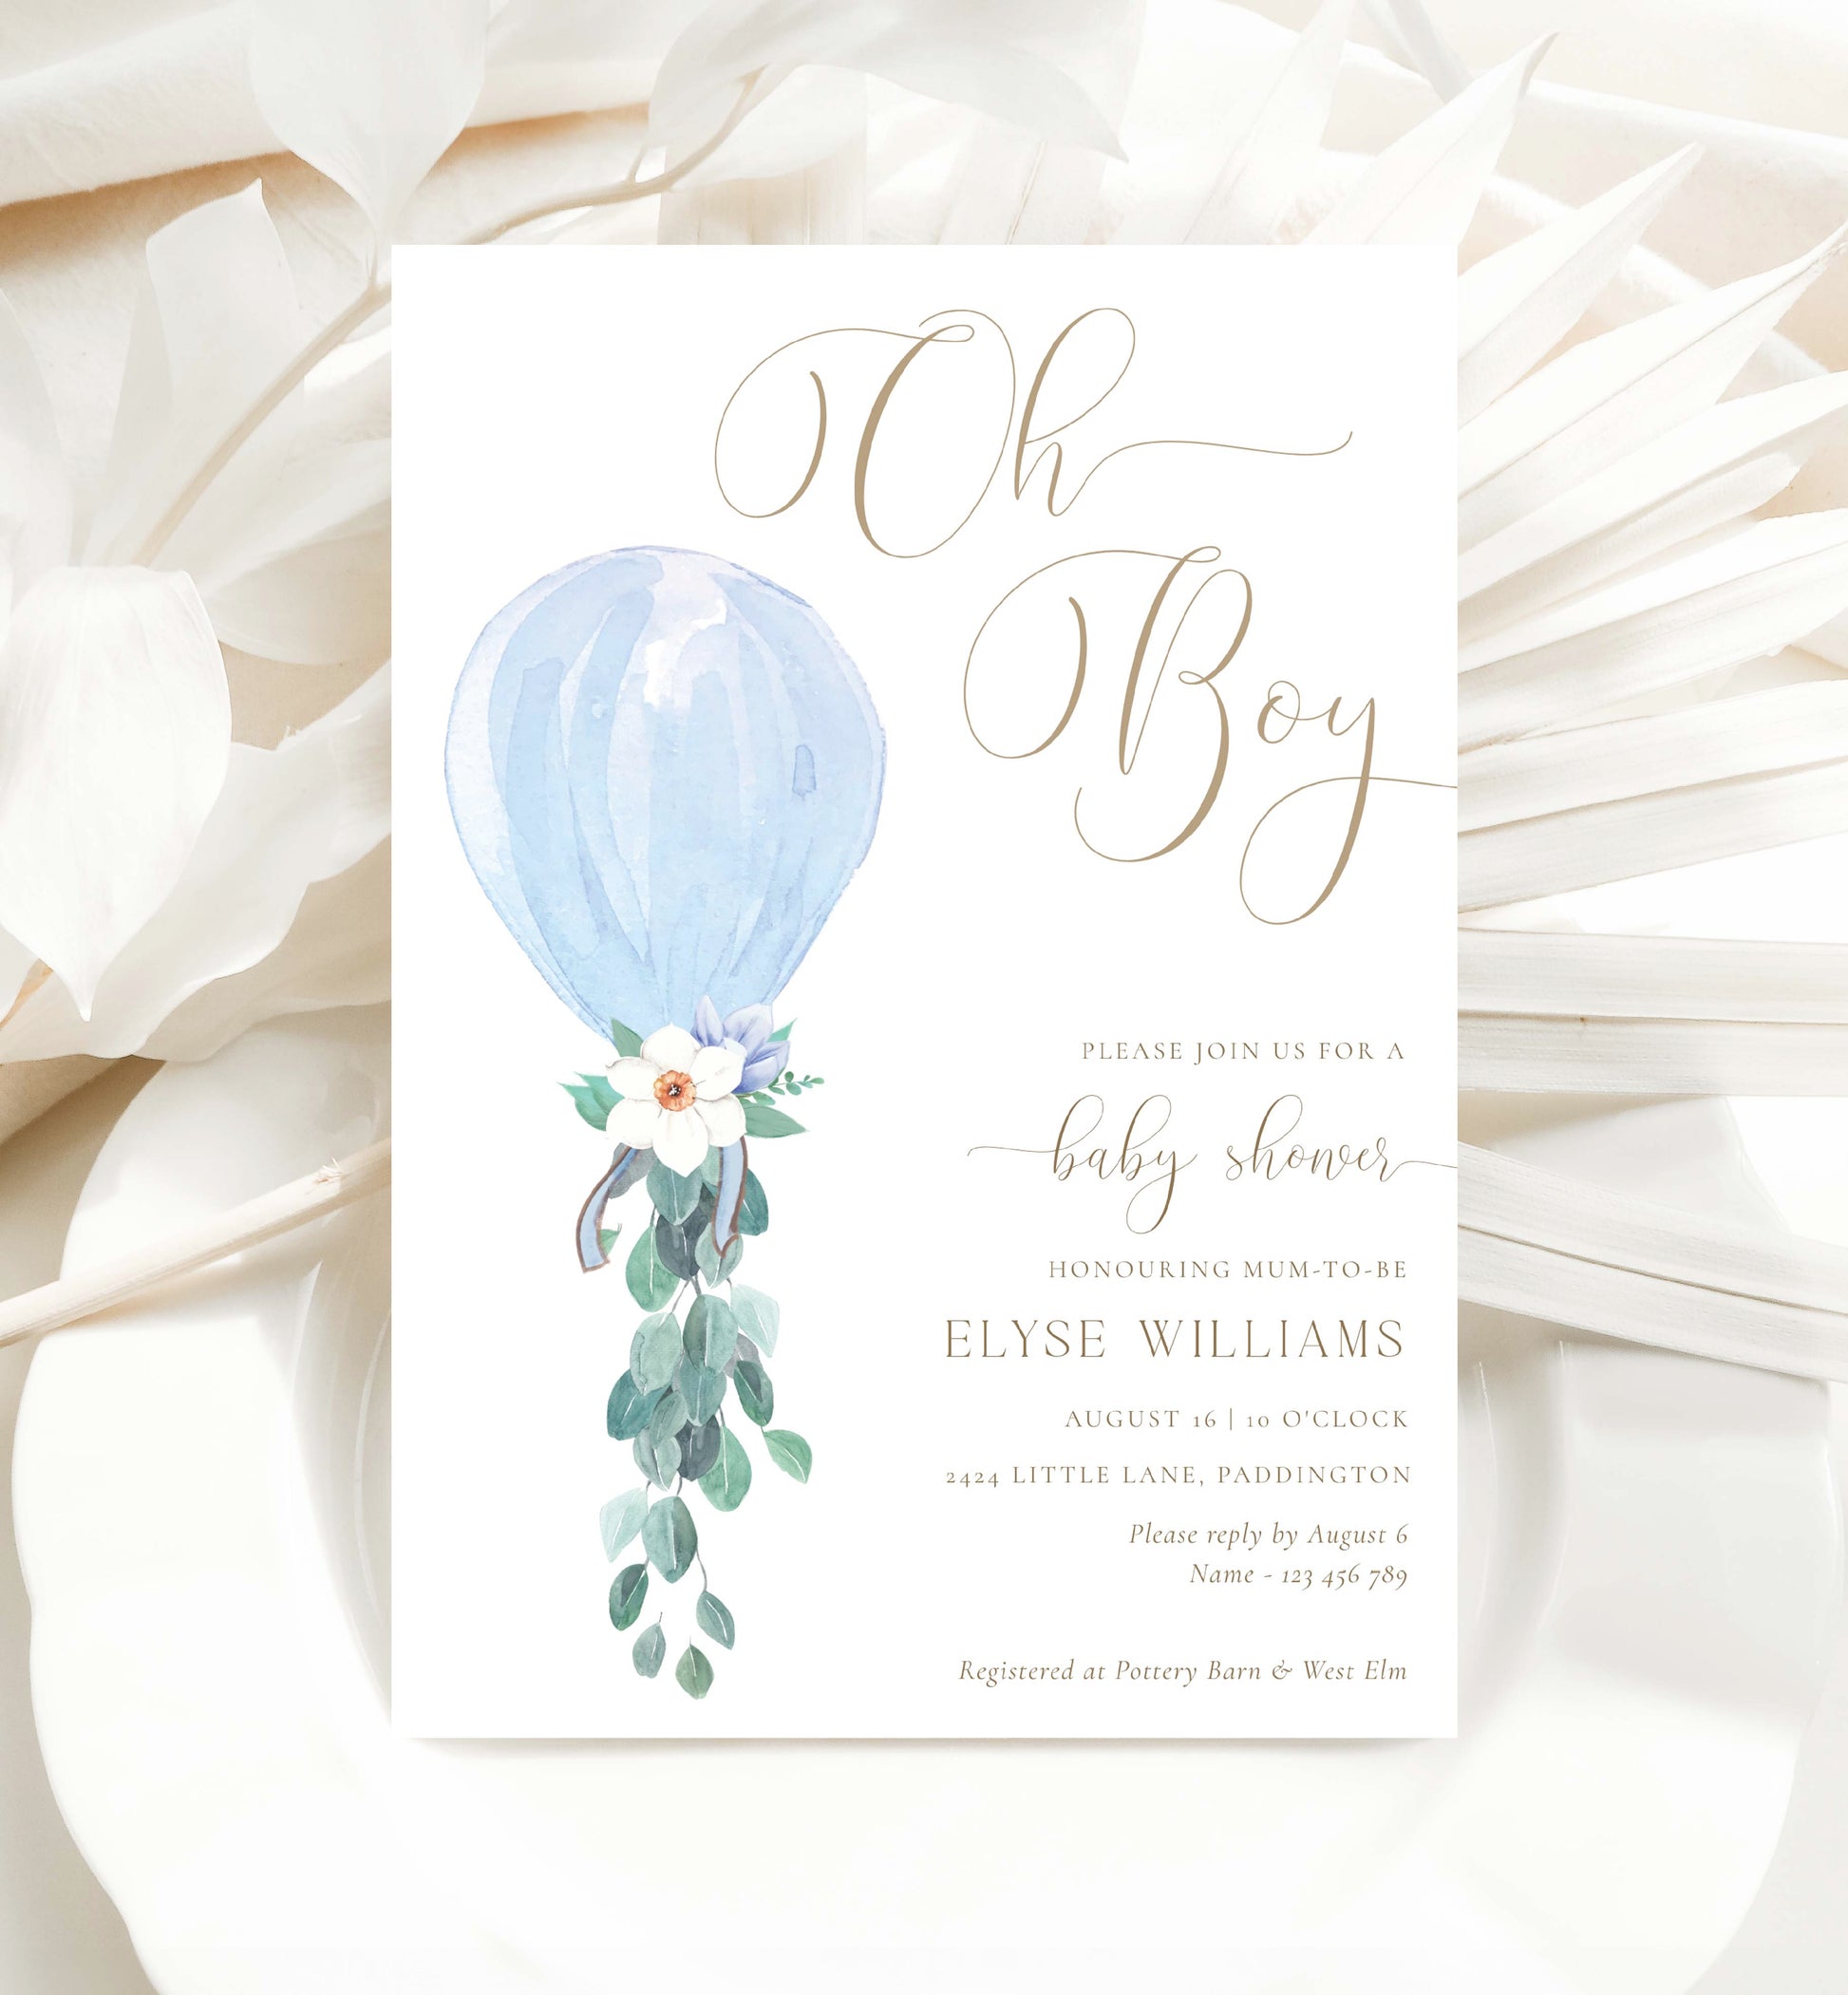 Oh Baby Baby Shower Invitation, Book Request, Raffle Ticket, Printable Balloon Boy Baby Shower Invite, Boy Baby Shower Invite, Darlington